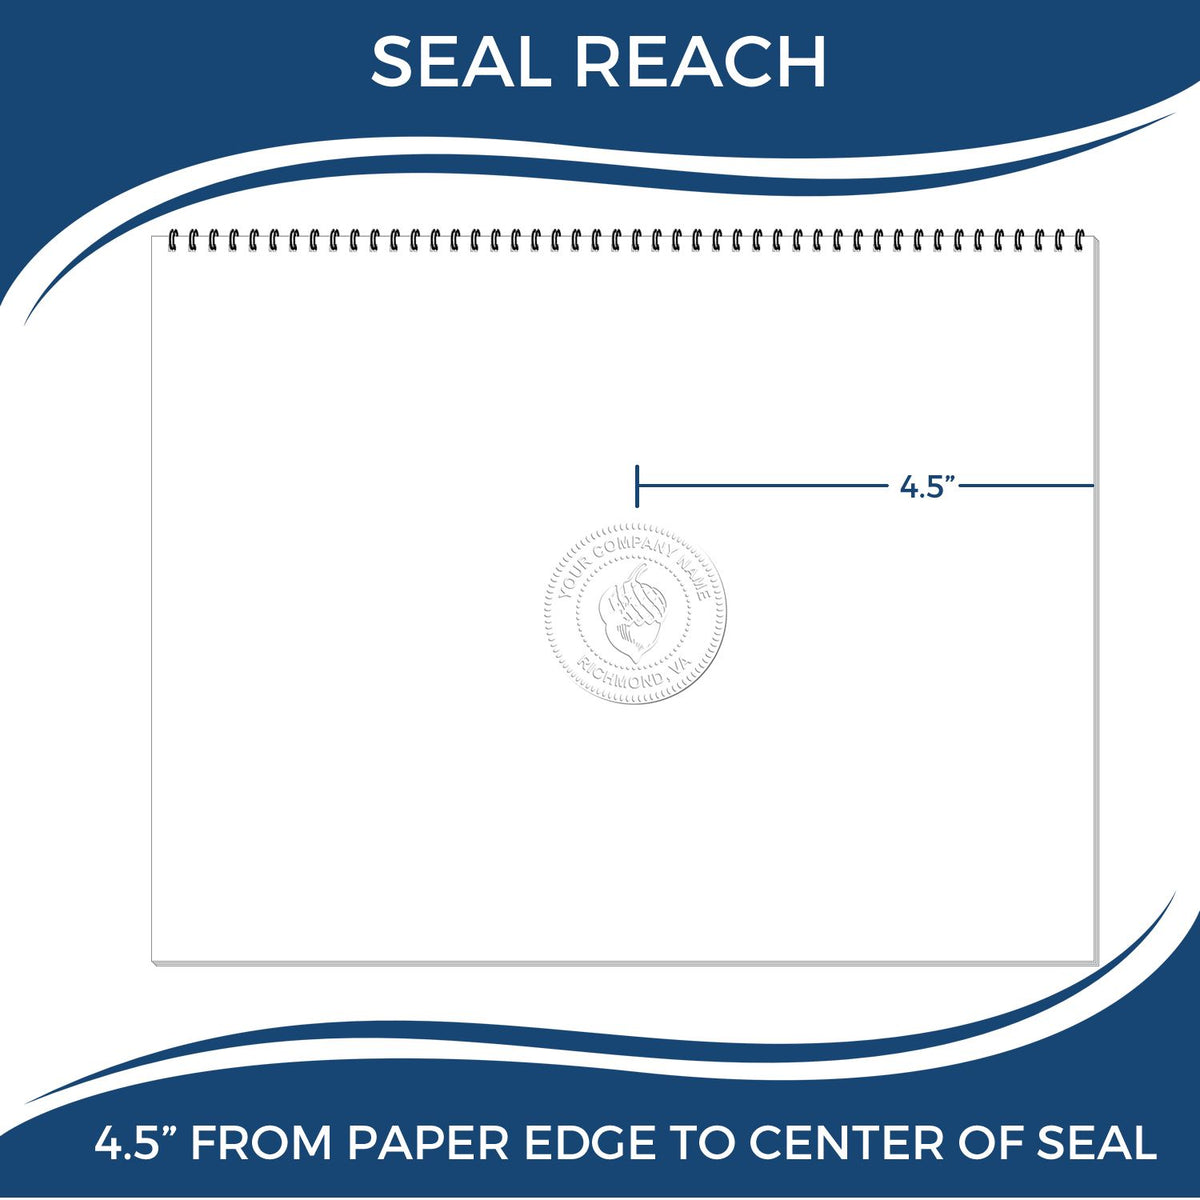 An infographic showing the seal reach which is represented by a ruler and a miniature seal image of the State of Delaware Extended Long Reach Geologist Seal